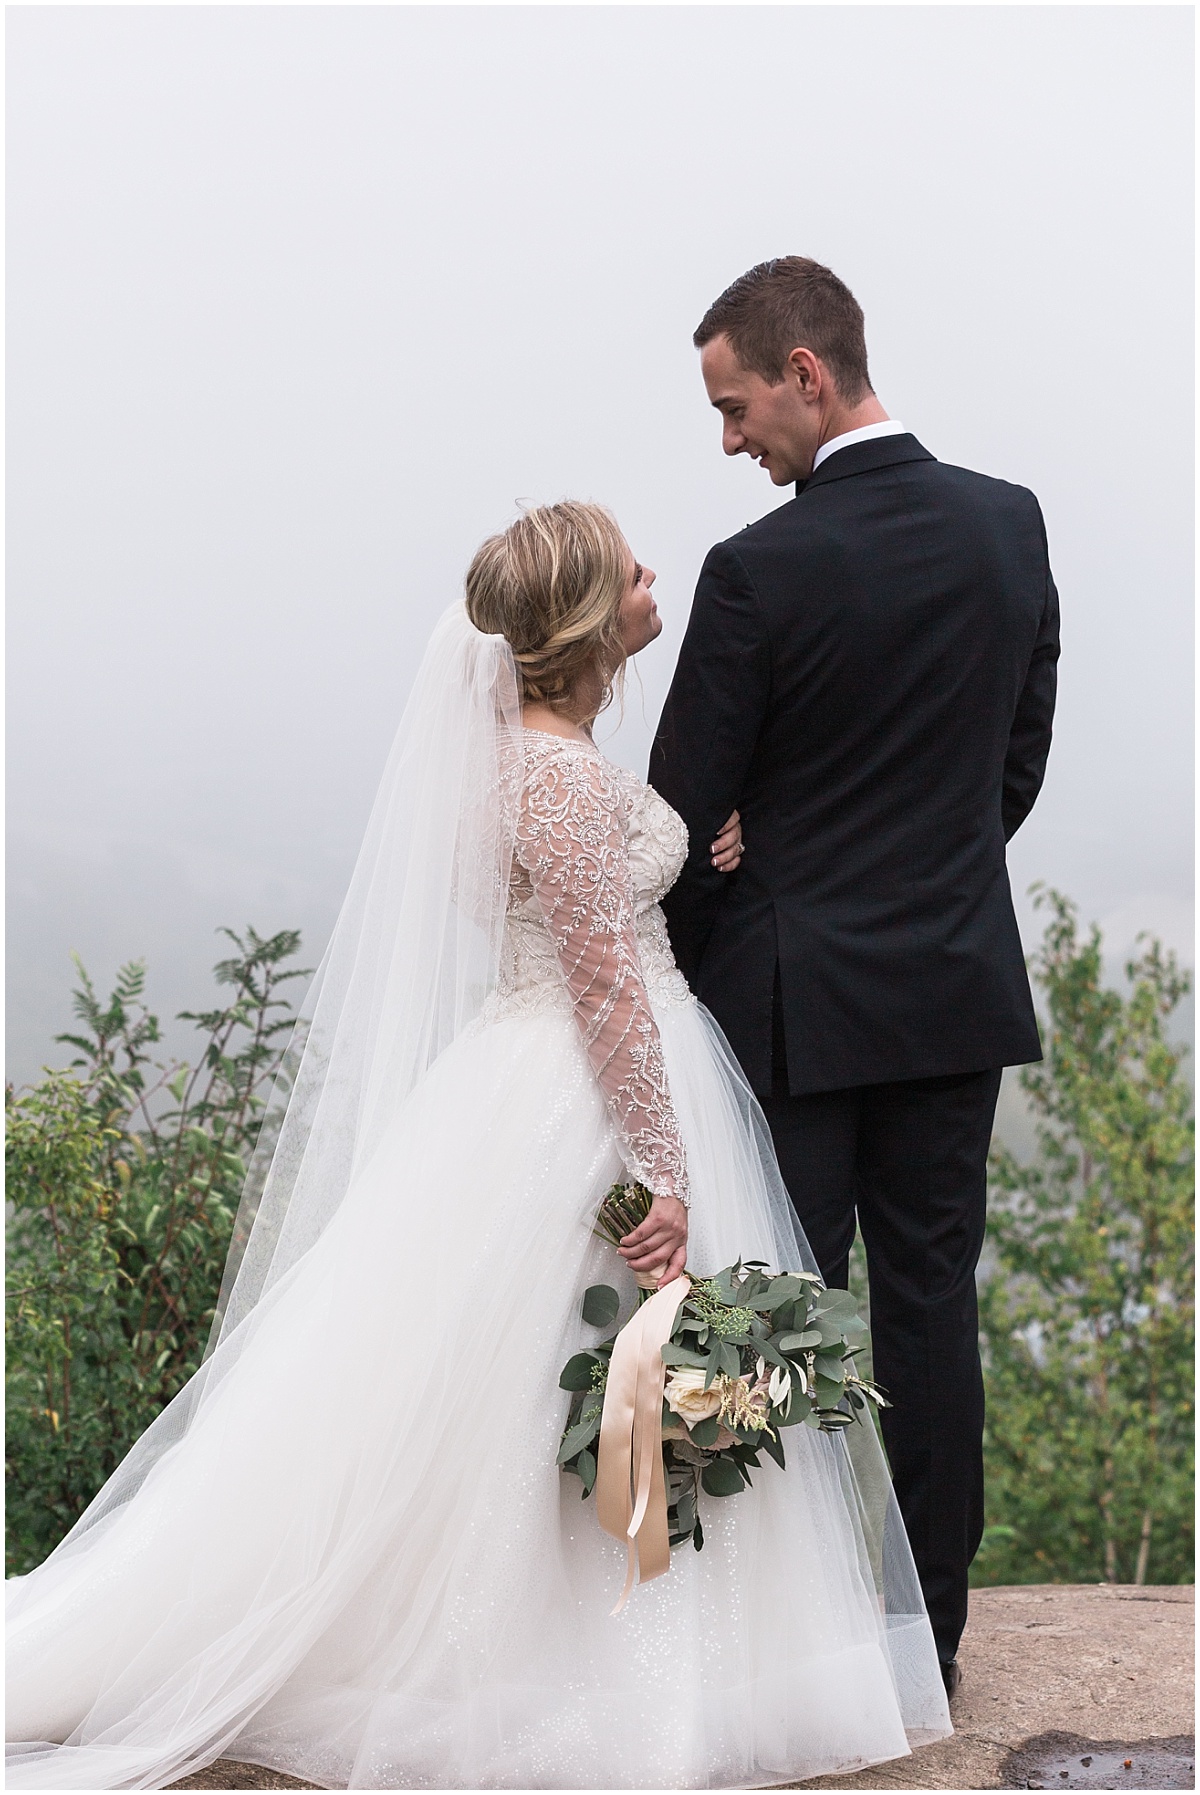 A bride looks up at her groom in front of a foggy backdrop for photos with Duluth wedding photographer Comfort & Cashmere images.